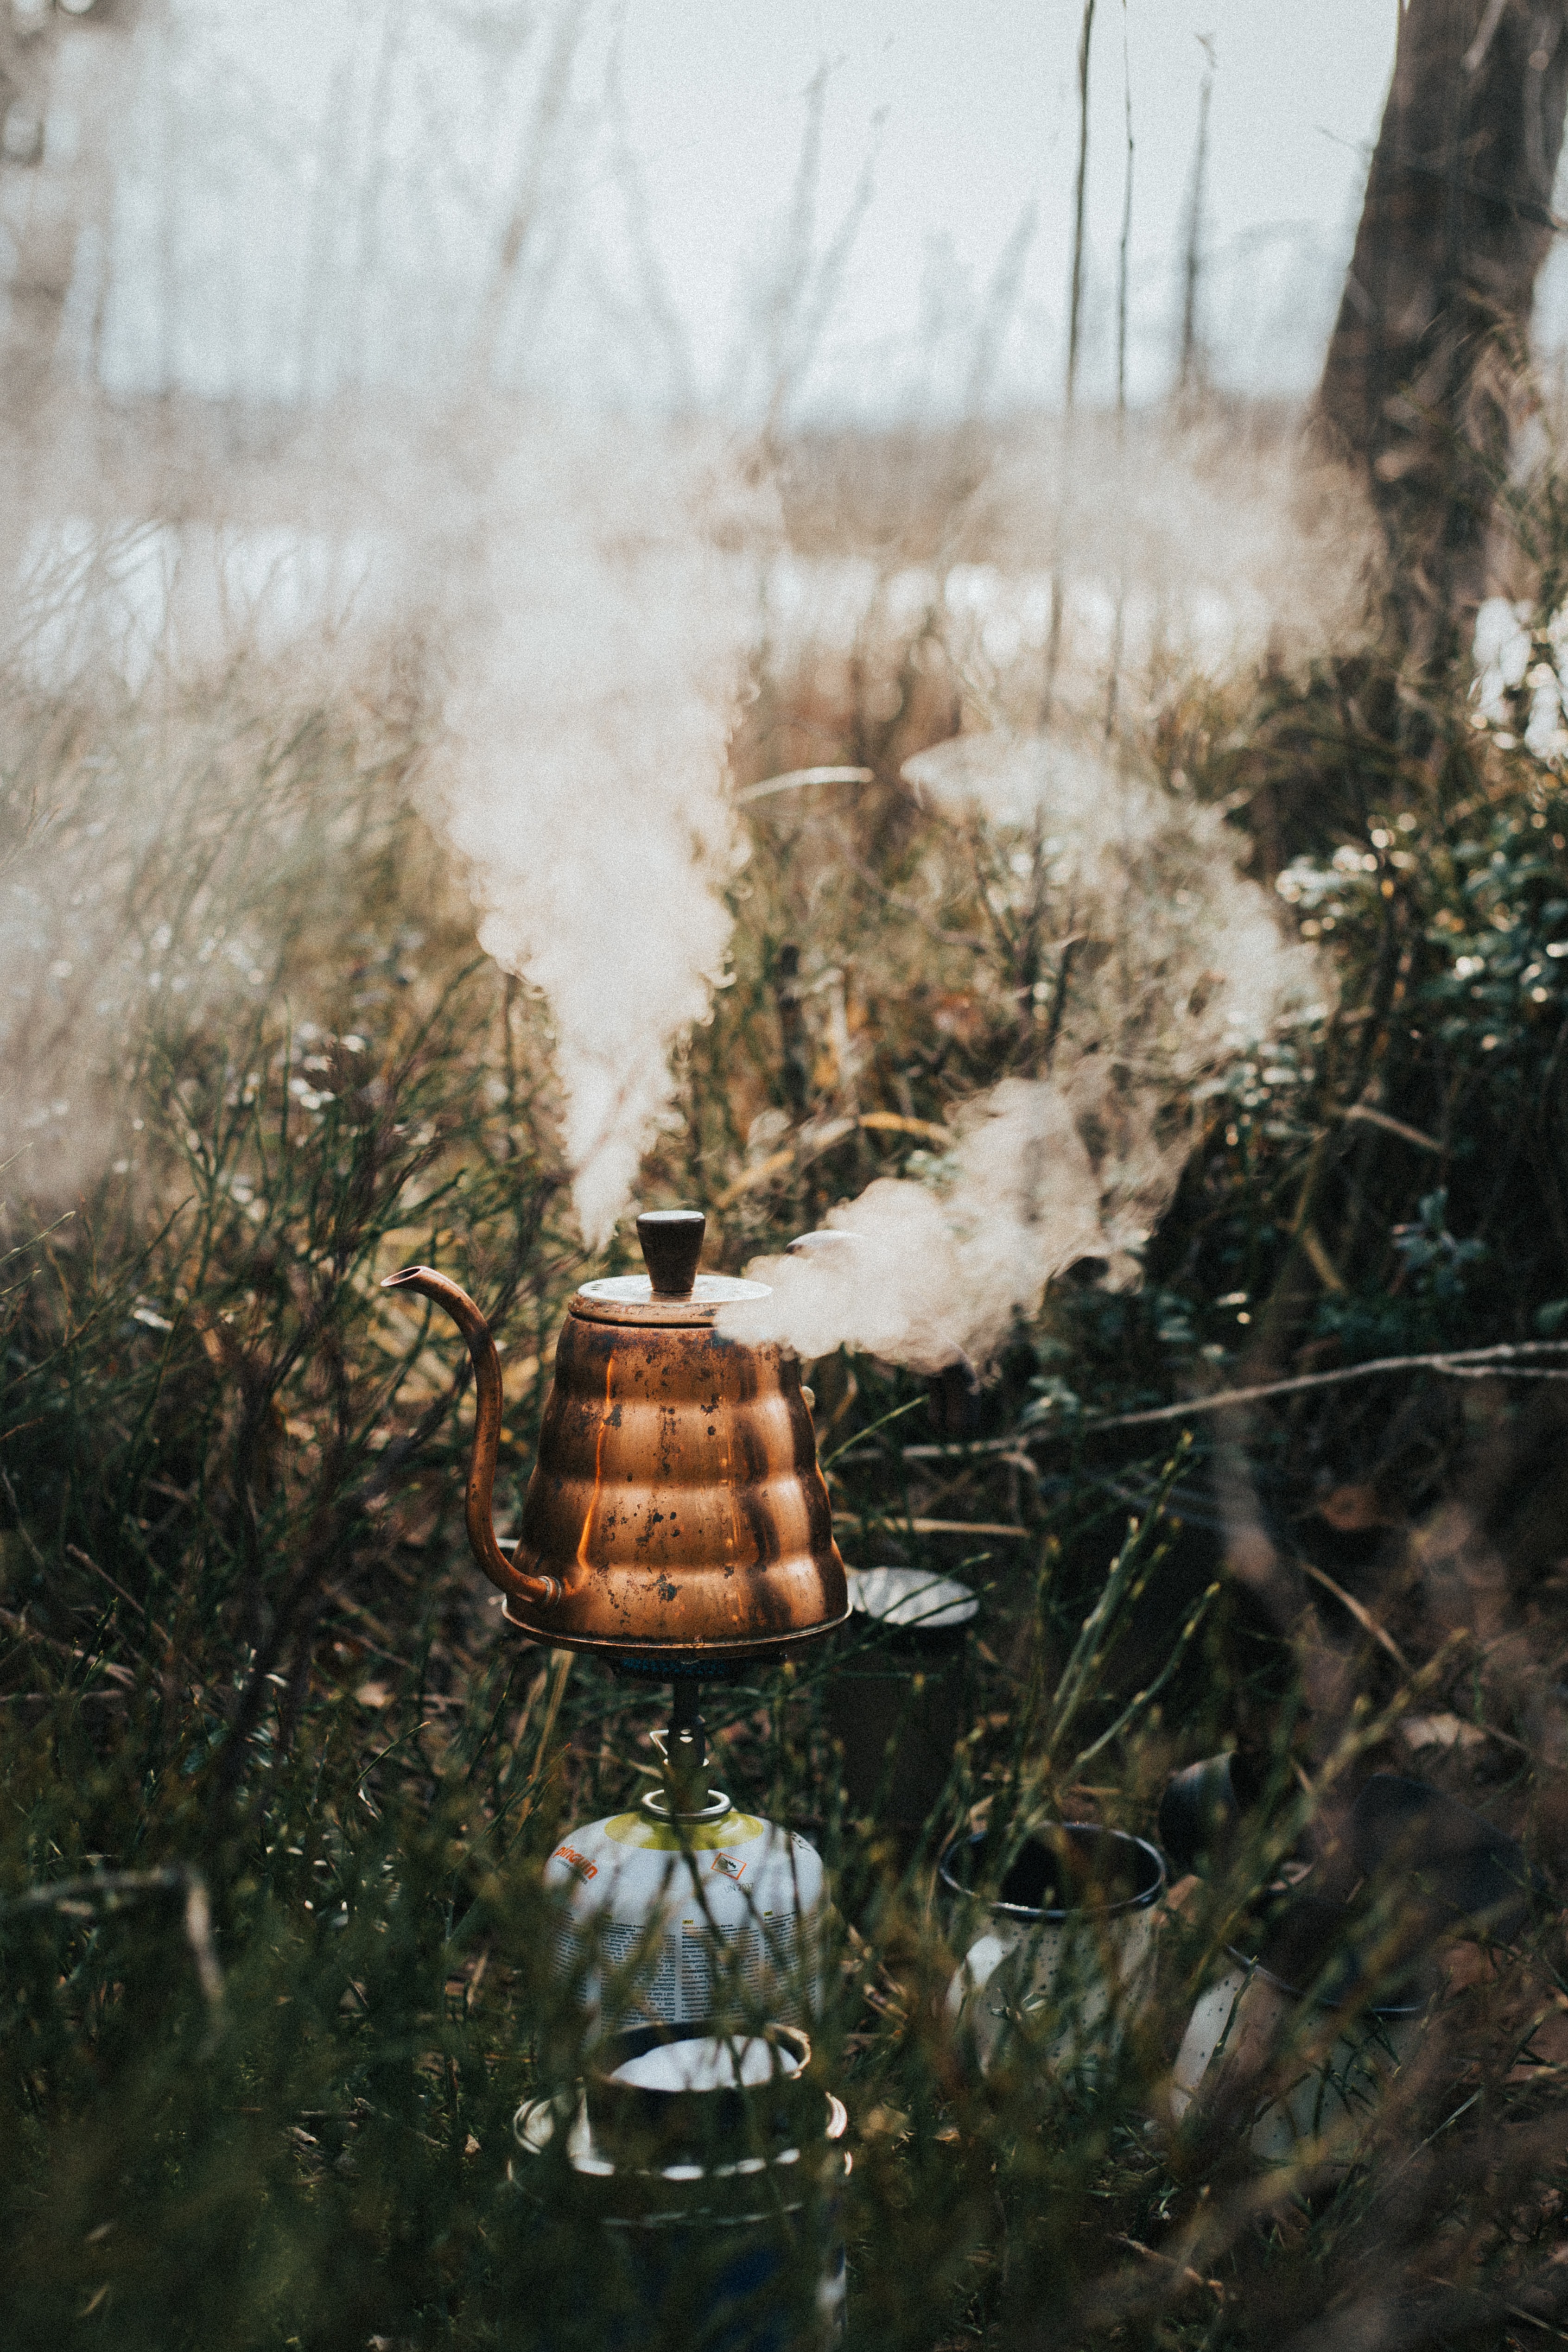 hike, steam, nature, grass, teapot, kettle, campaign